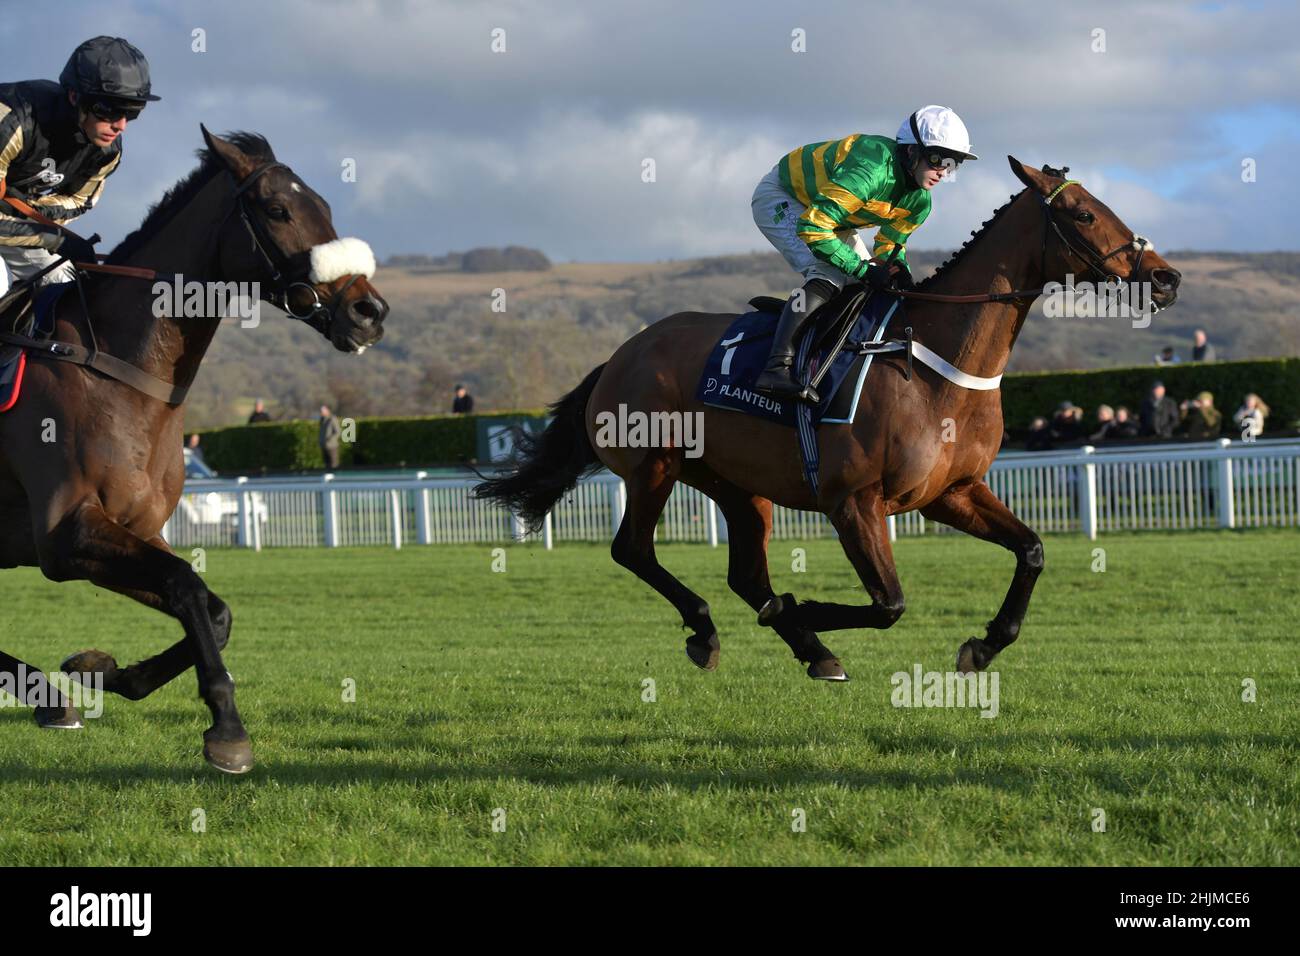 Racing at Cheltenham Racecourse, Prestbury Park on Festival Trials Day in January ahead of the Cheltenham Gold Cup Festival in March.   Sixth race 3.0 Stock Photo